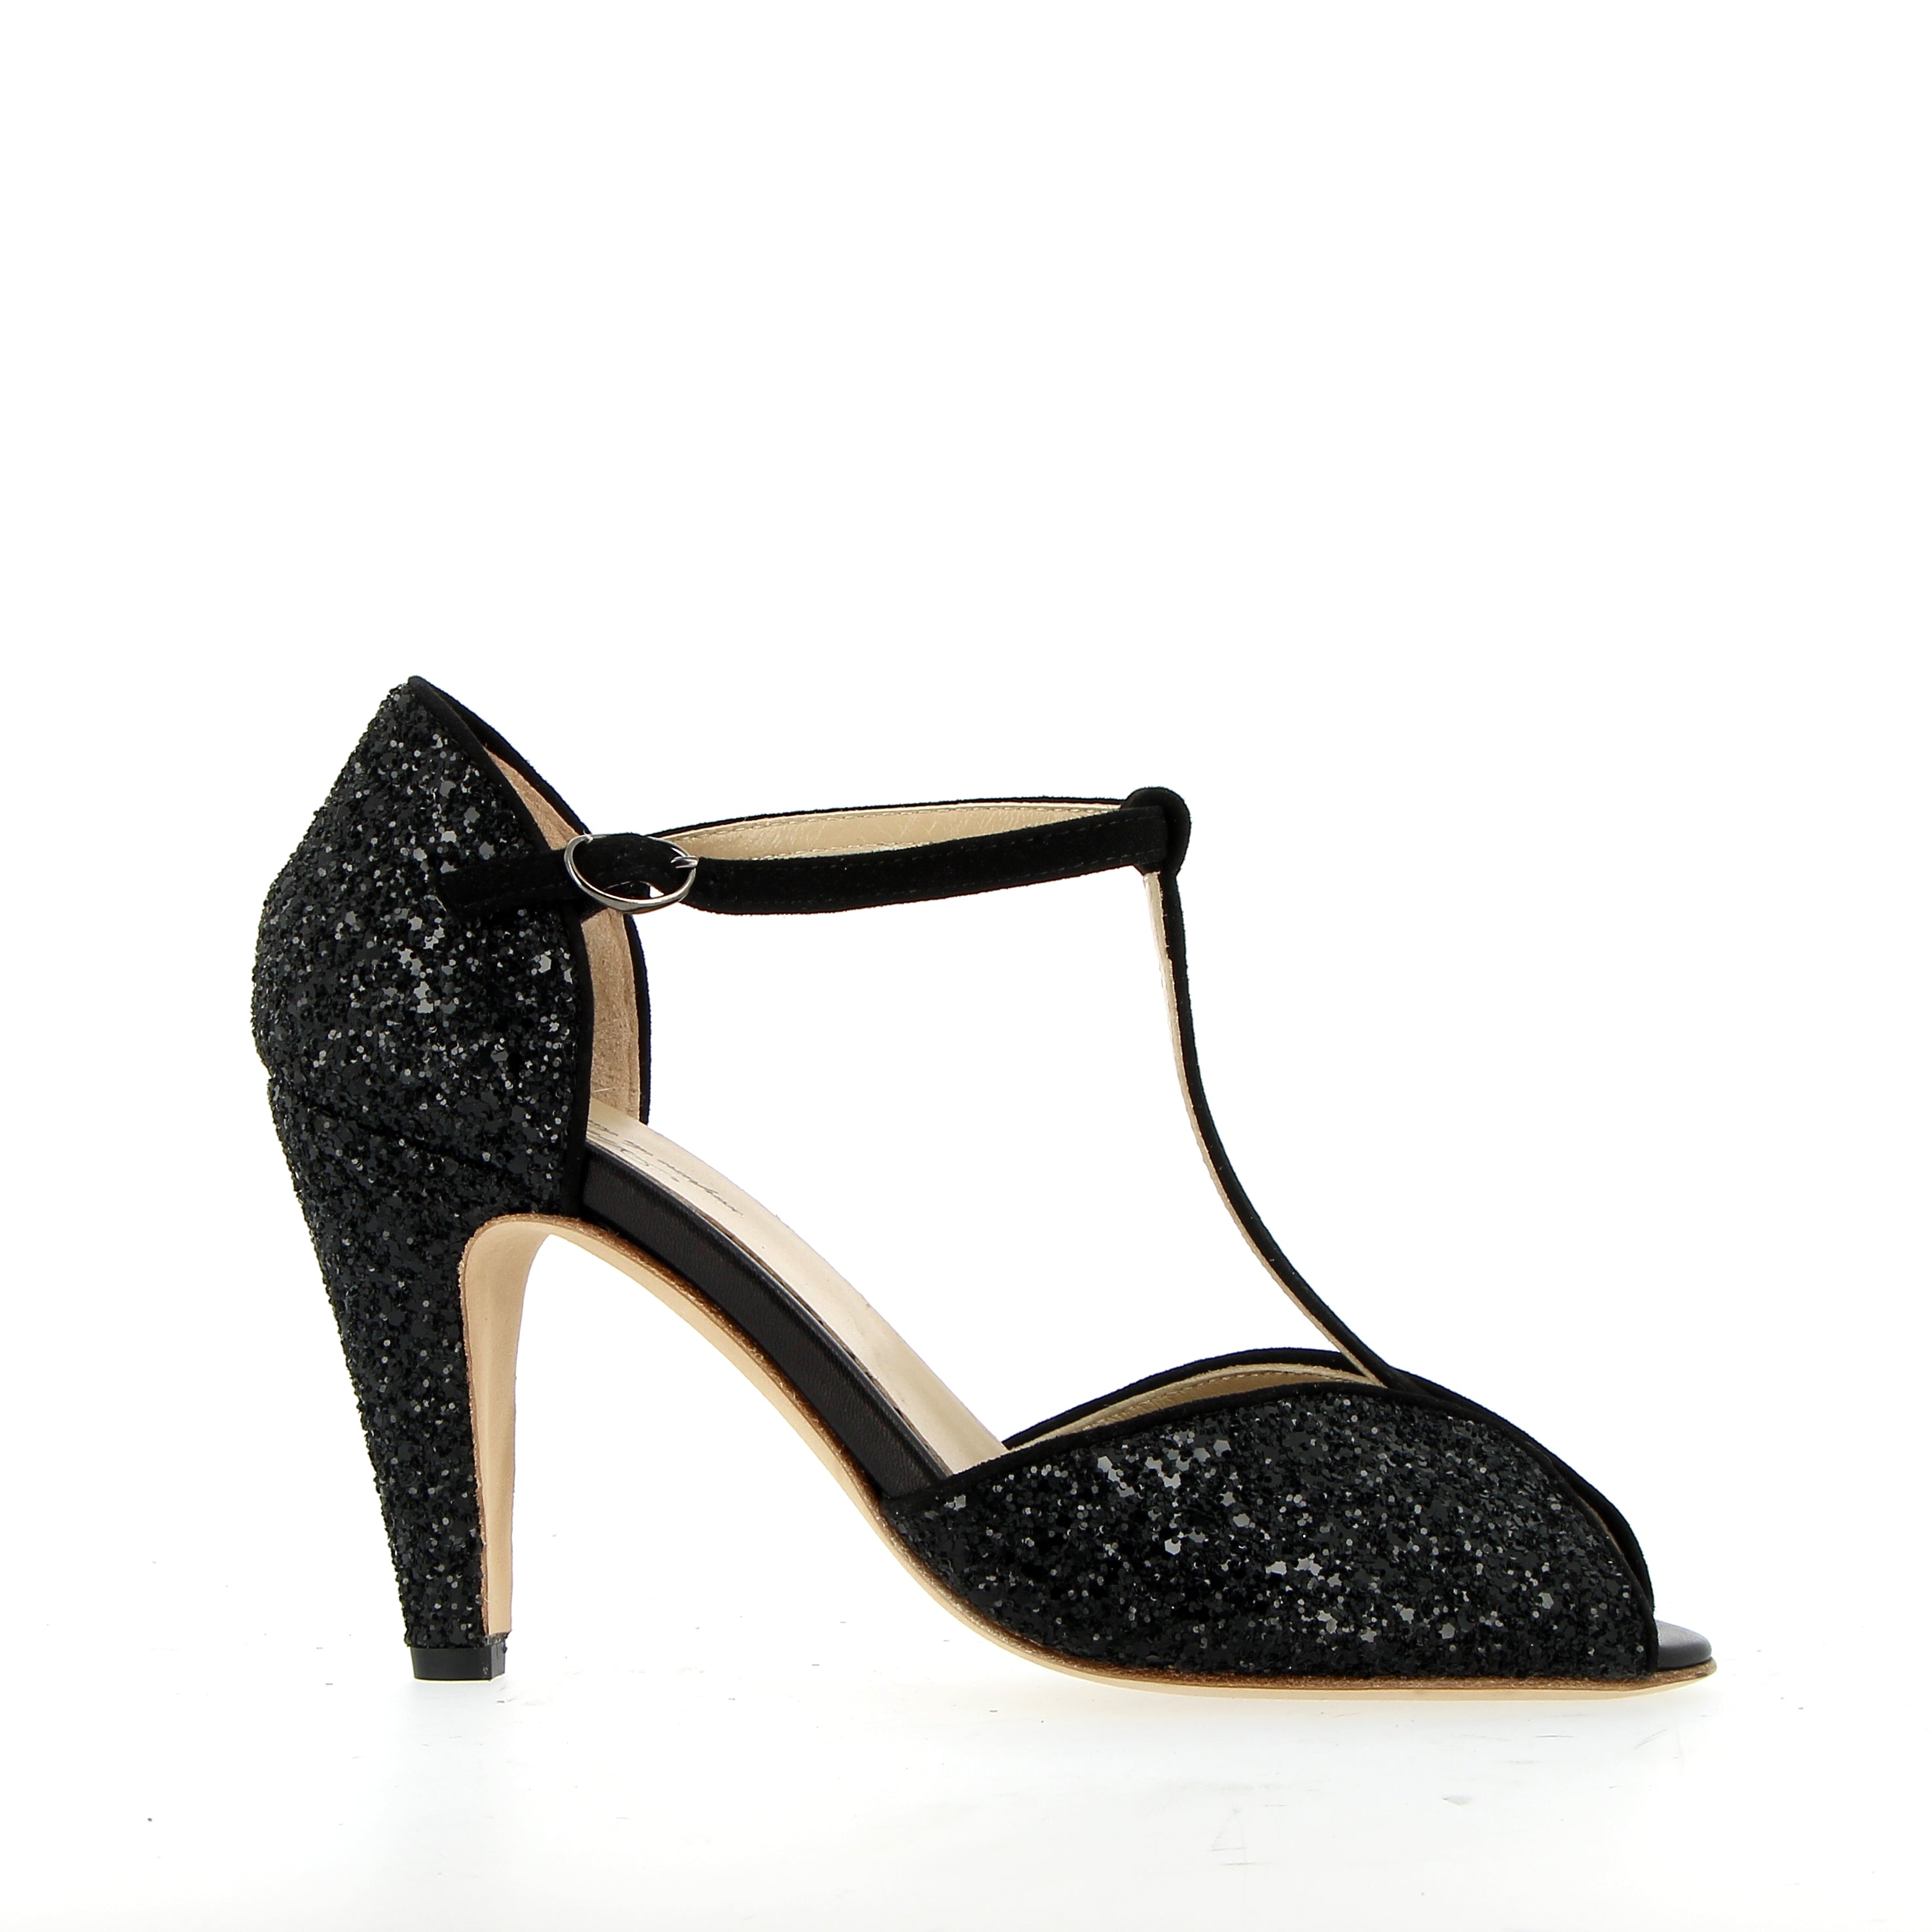 Black glitter and suede sandal